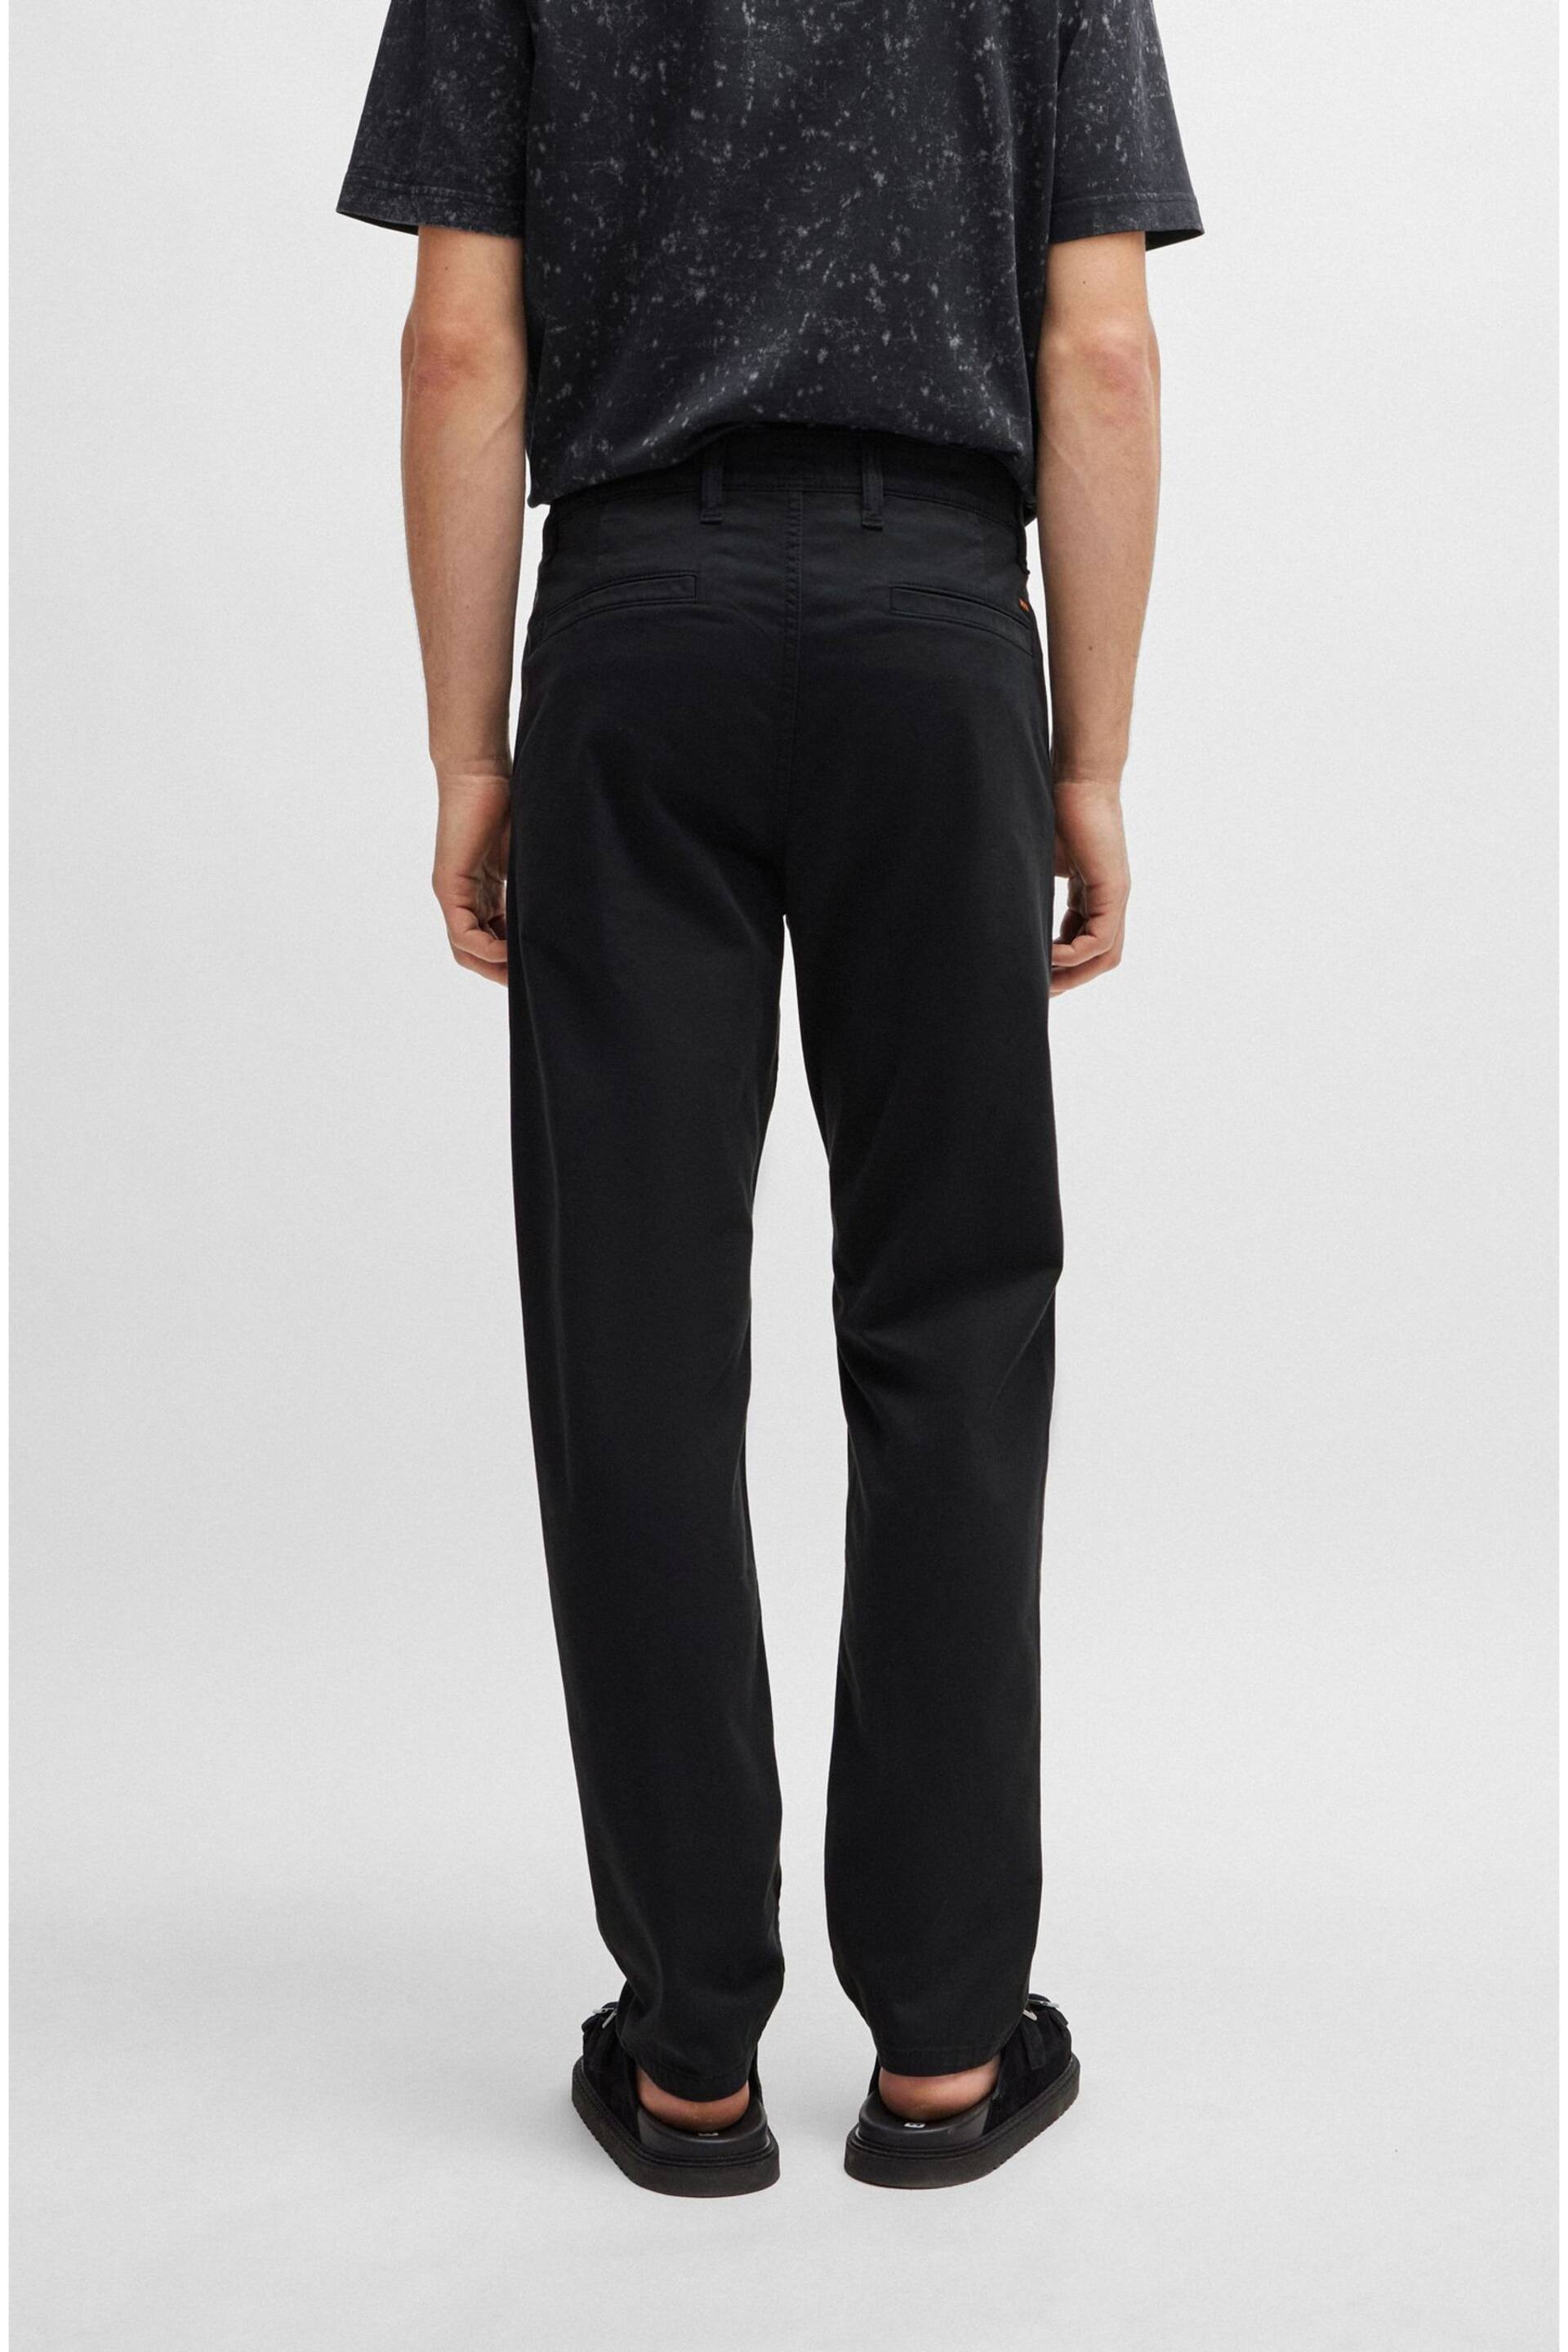 BOSS Black Tapered-Fit Chinos In Stretch-Cotton Satin - Image 5 of 9